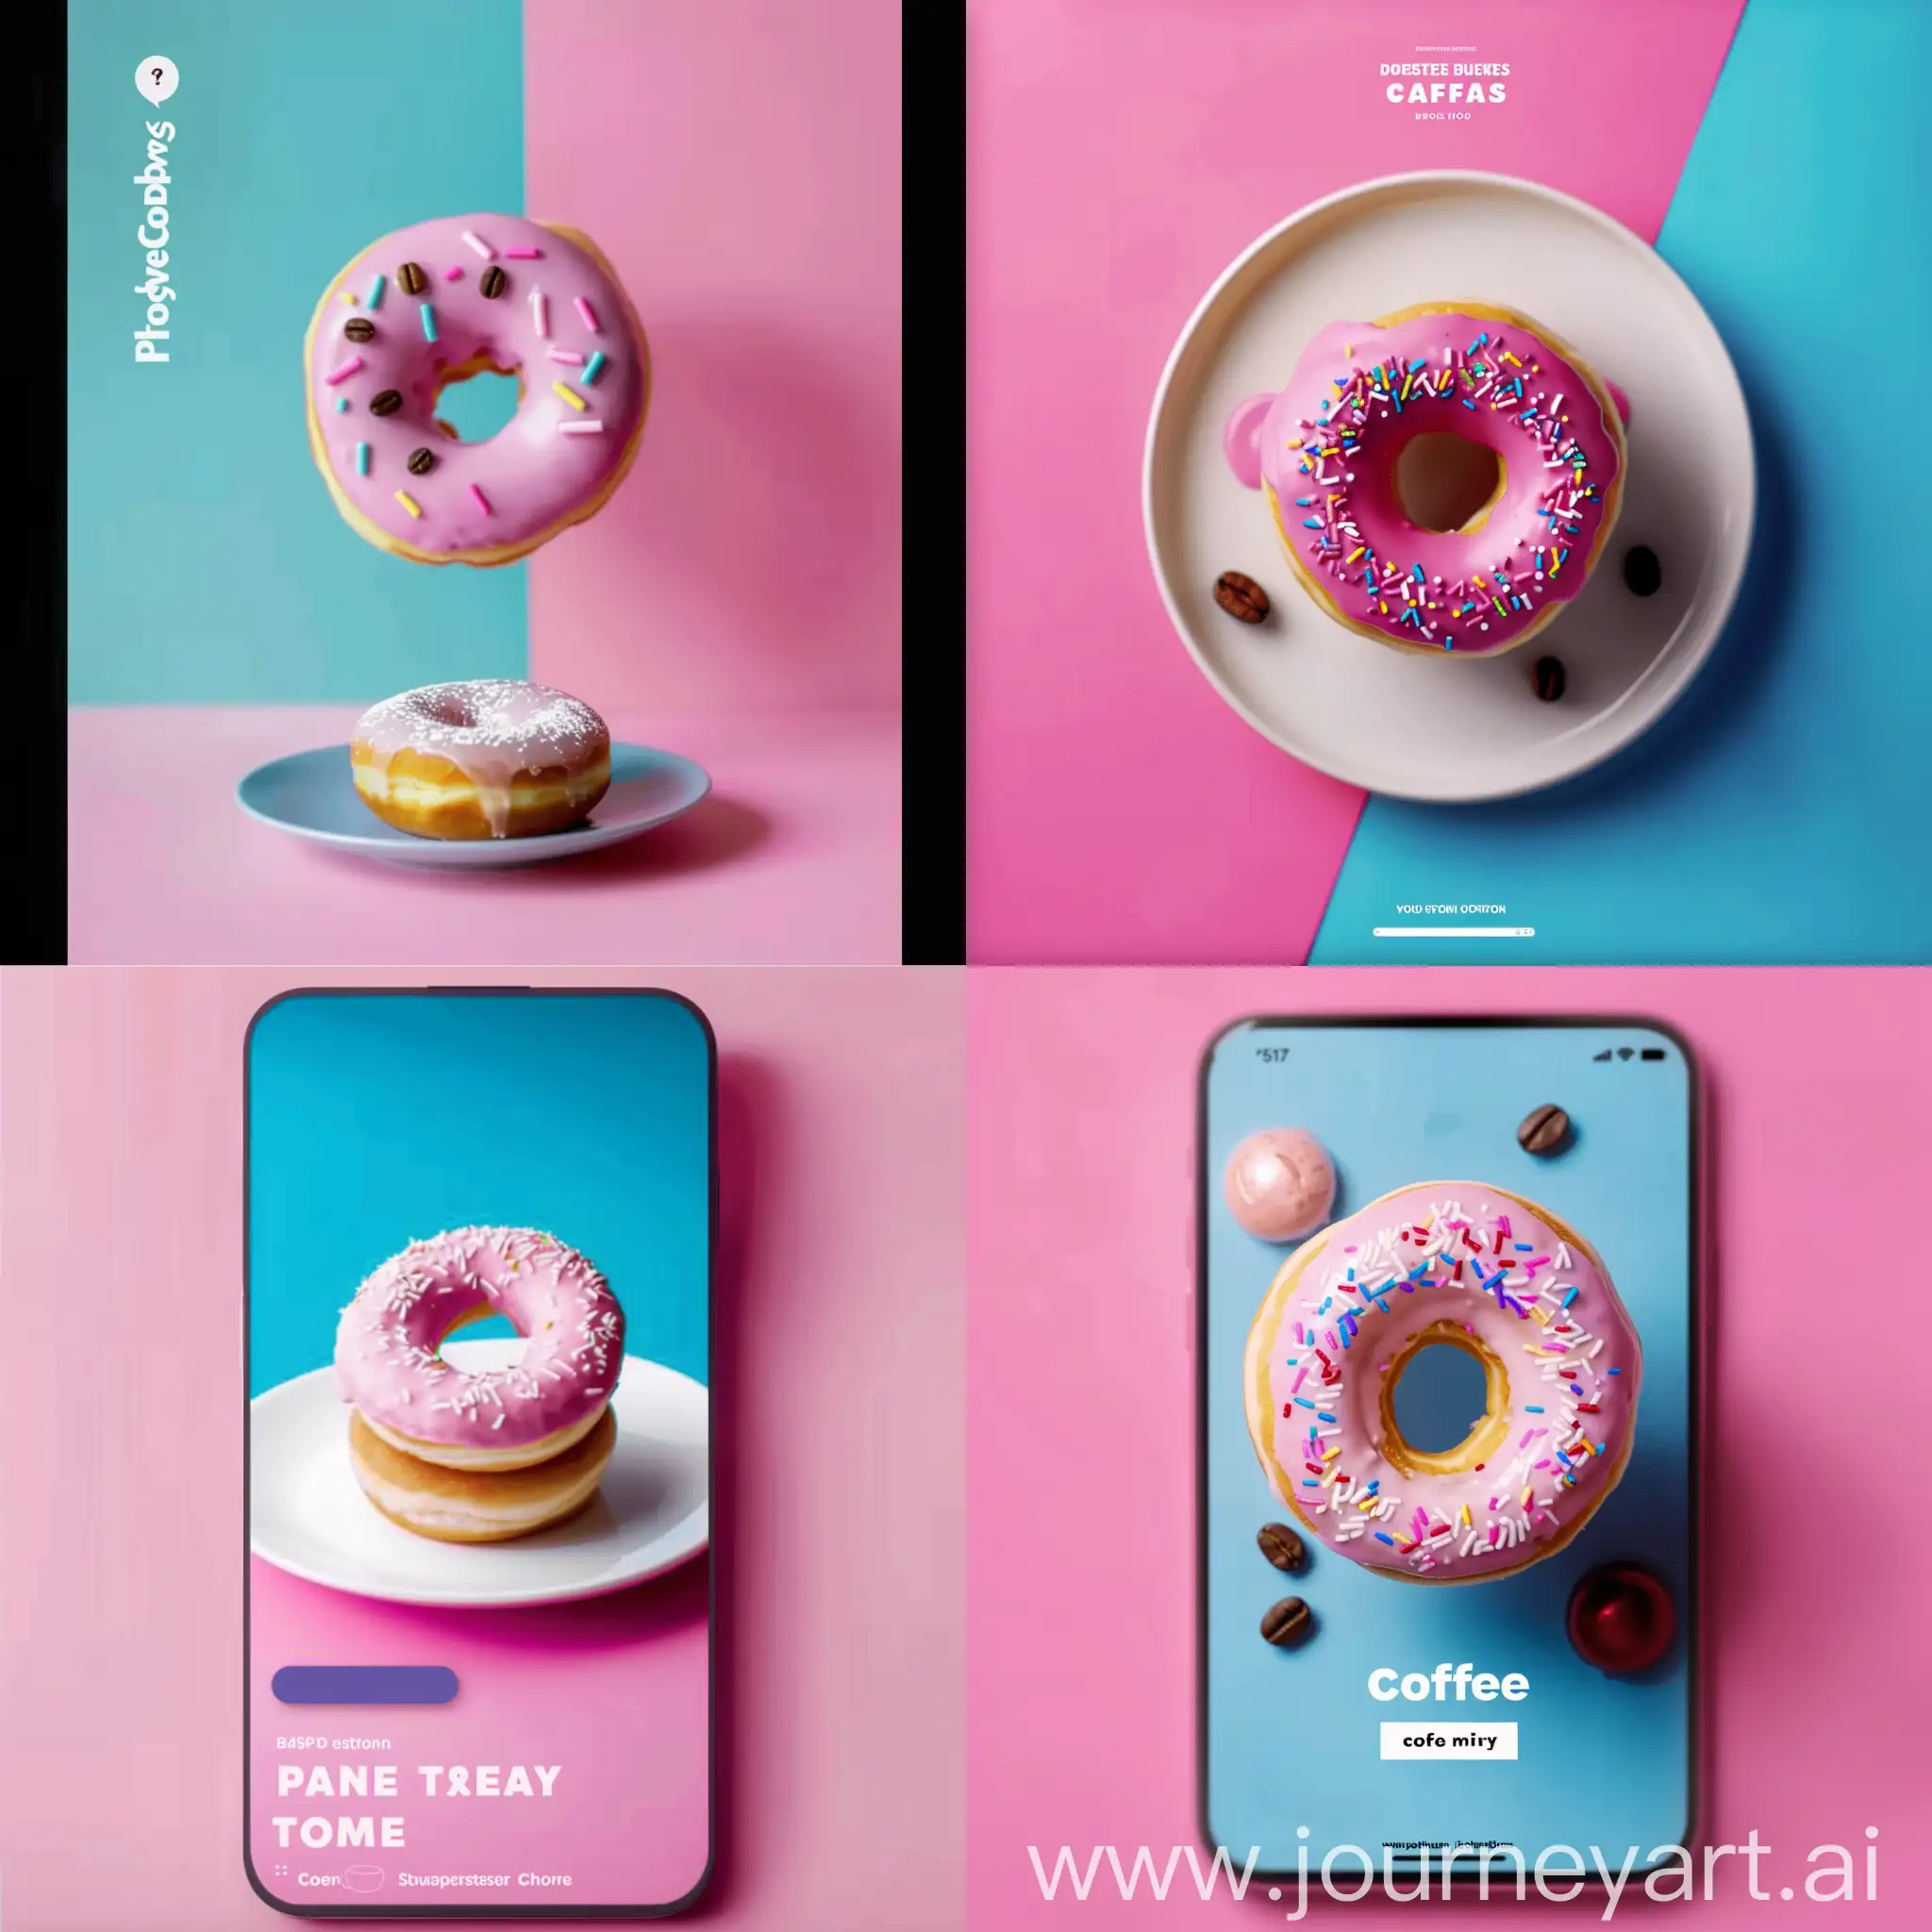 Coffee-and-Pastries-on-Minimalistic-Pink-Blue-Background